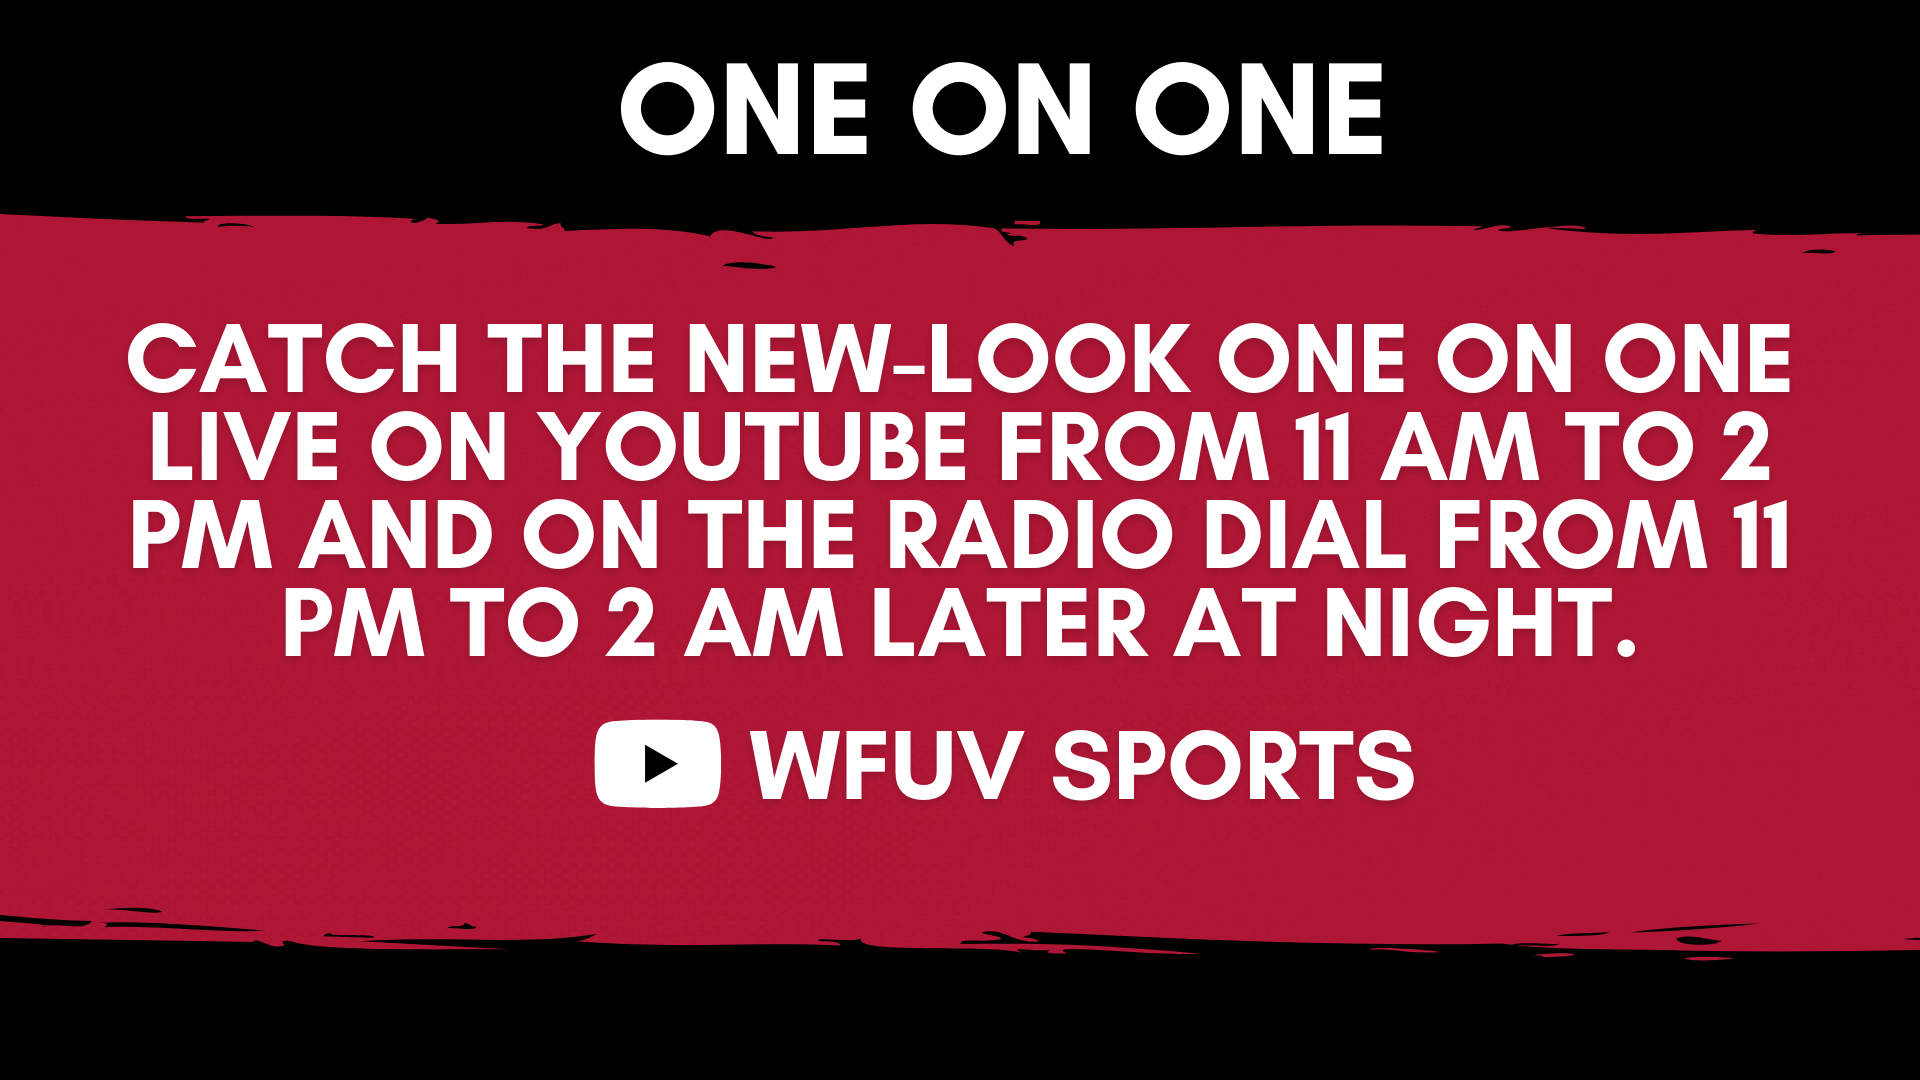 One on One WFUV